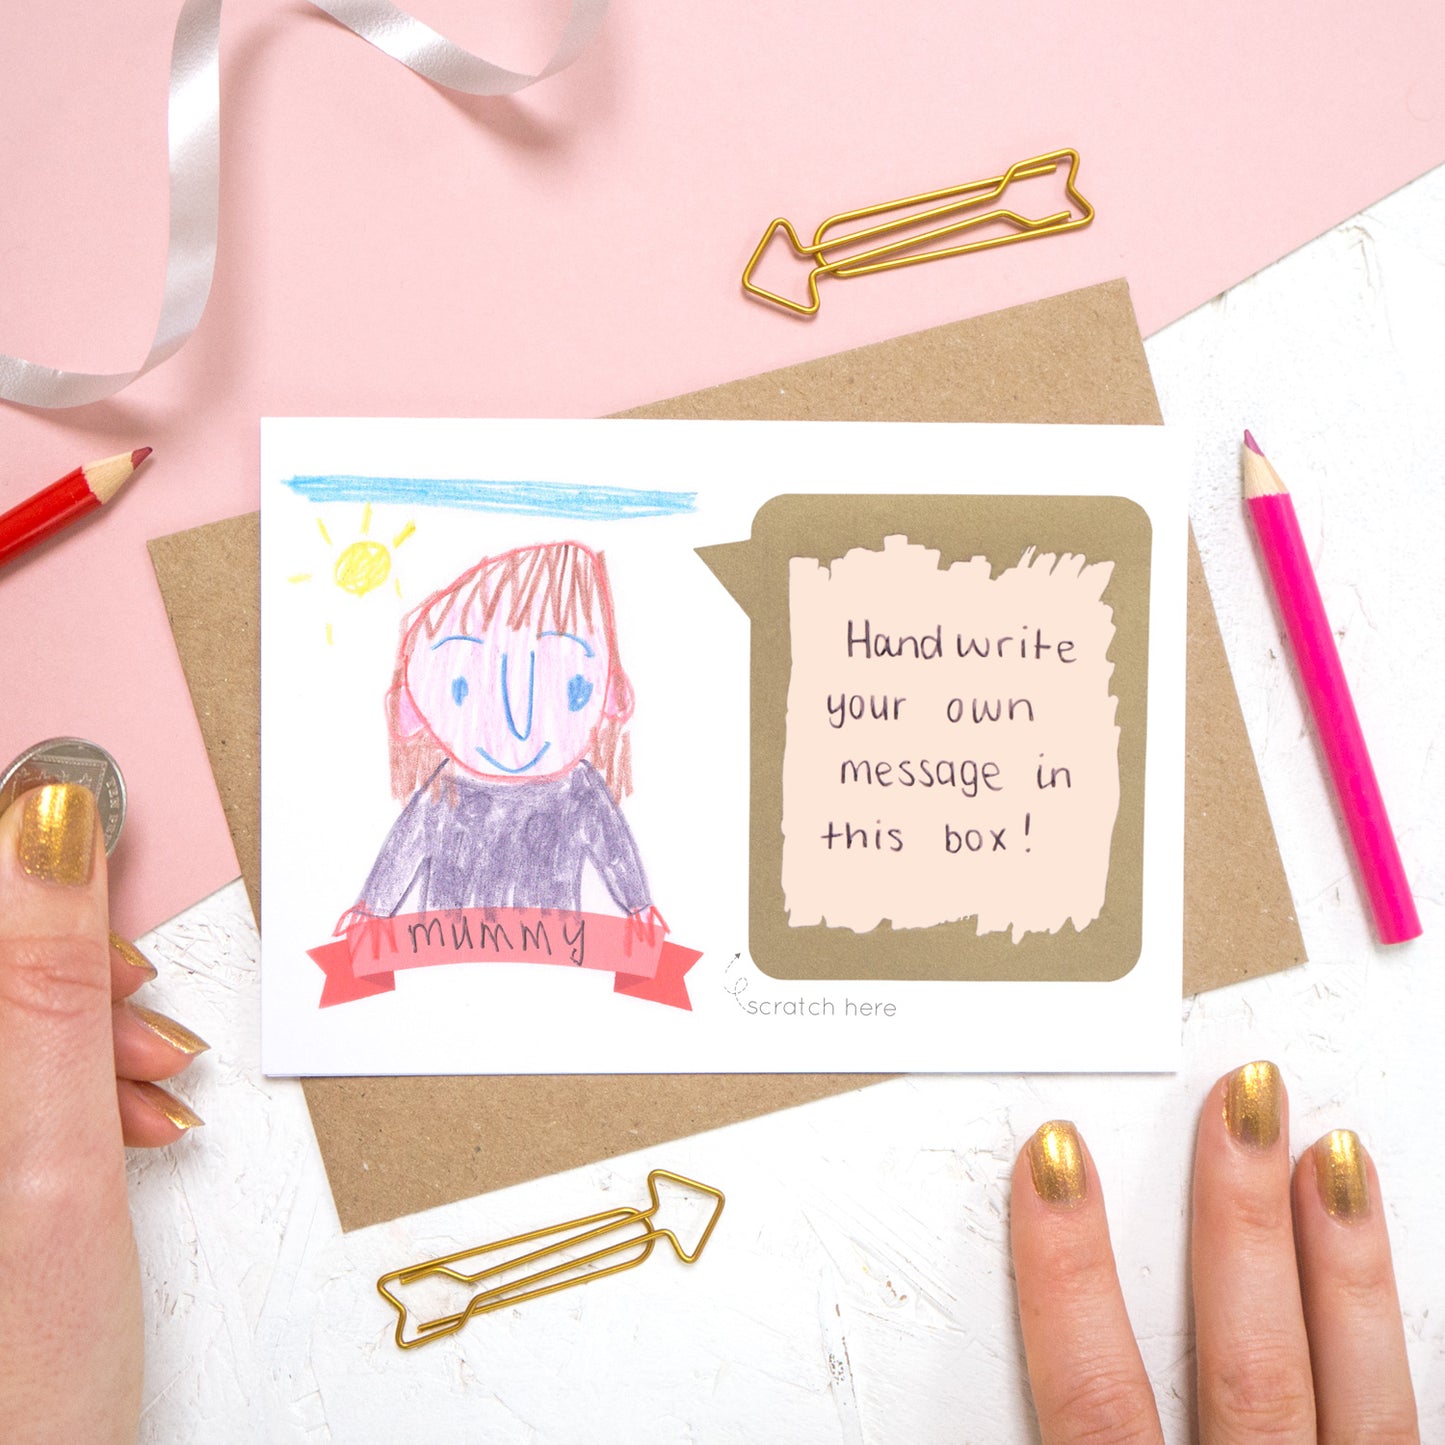 Draw your own scratch card with a hand written message of 'i love you mummy'. The card features a child like drawing of a person and the panel has been scratched off to reveal a hand written message.